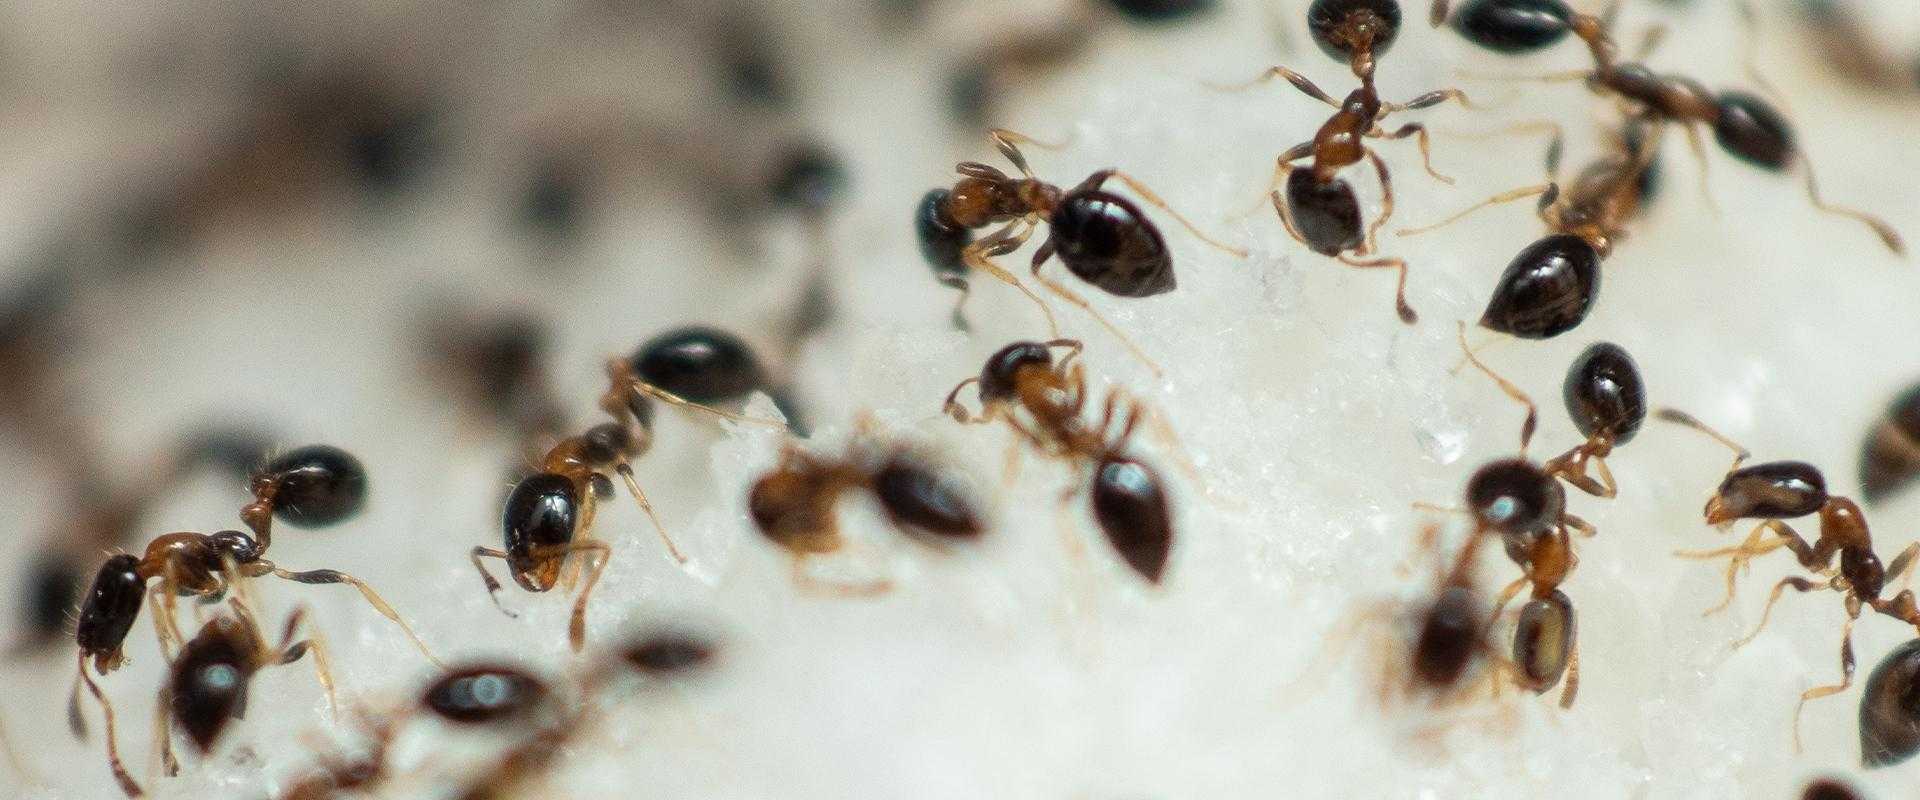 ants on sugar in south florida